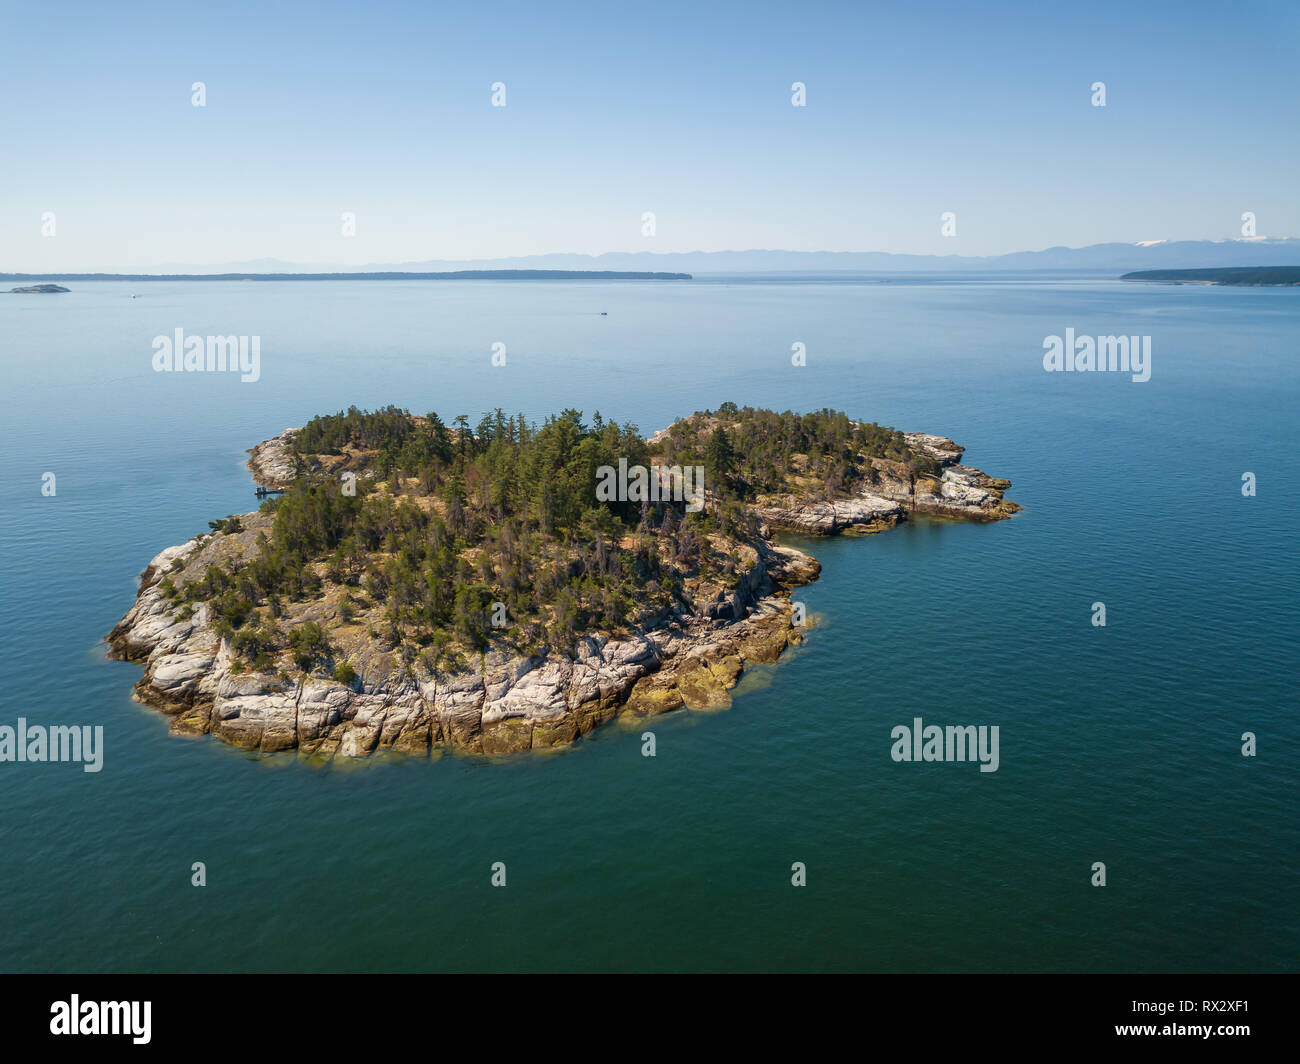 Aerial view of a rocky island during a vibrant sunny summer day. Taken near Powell River, Sunshine Coast, British Columbia, Canada. Stock Photo